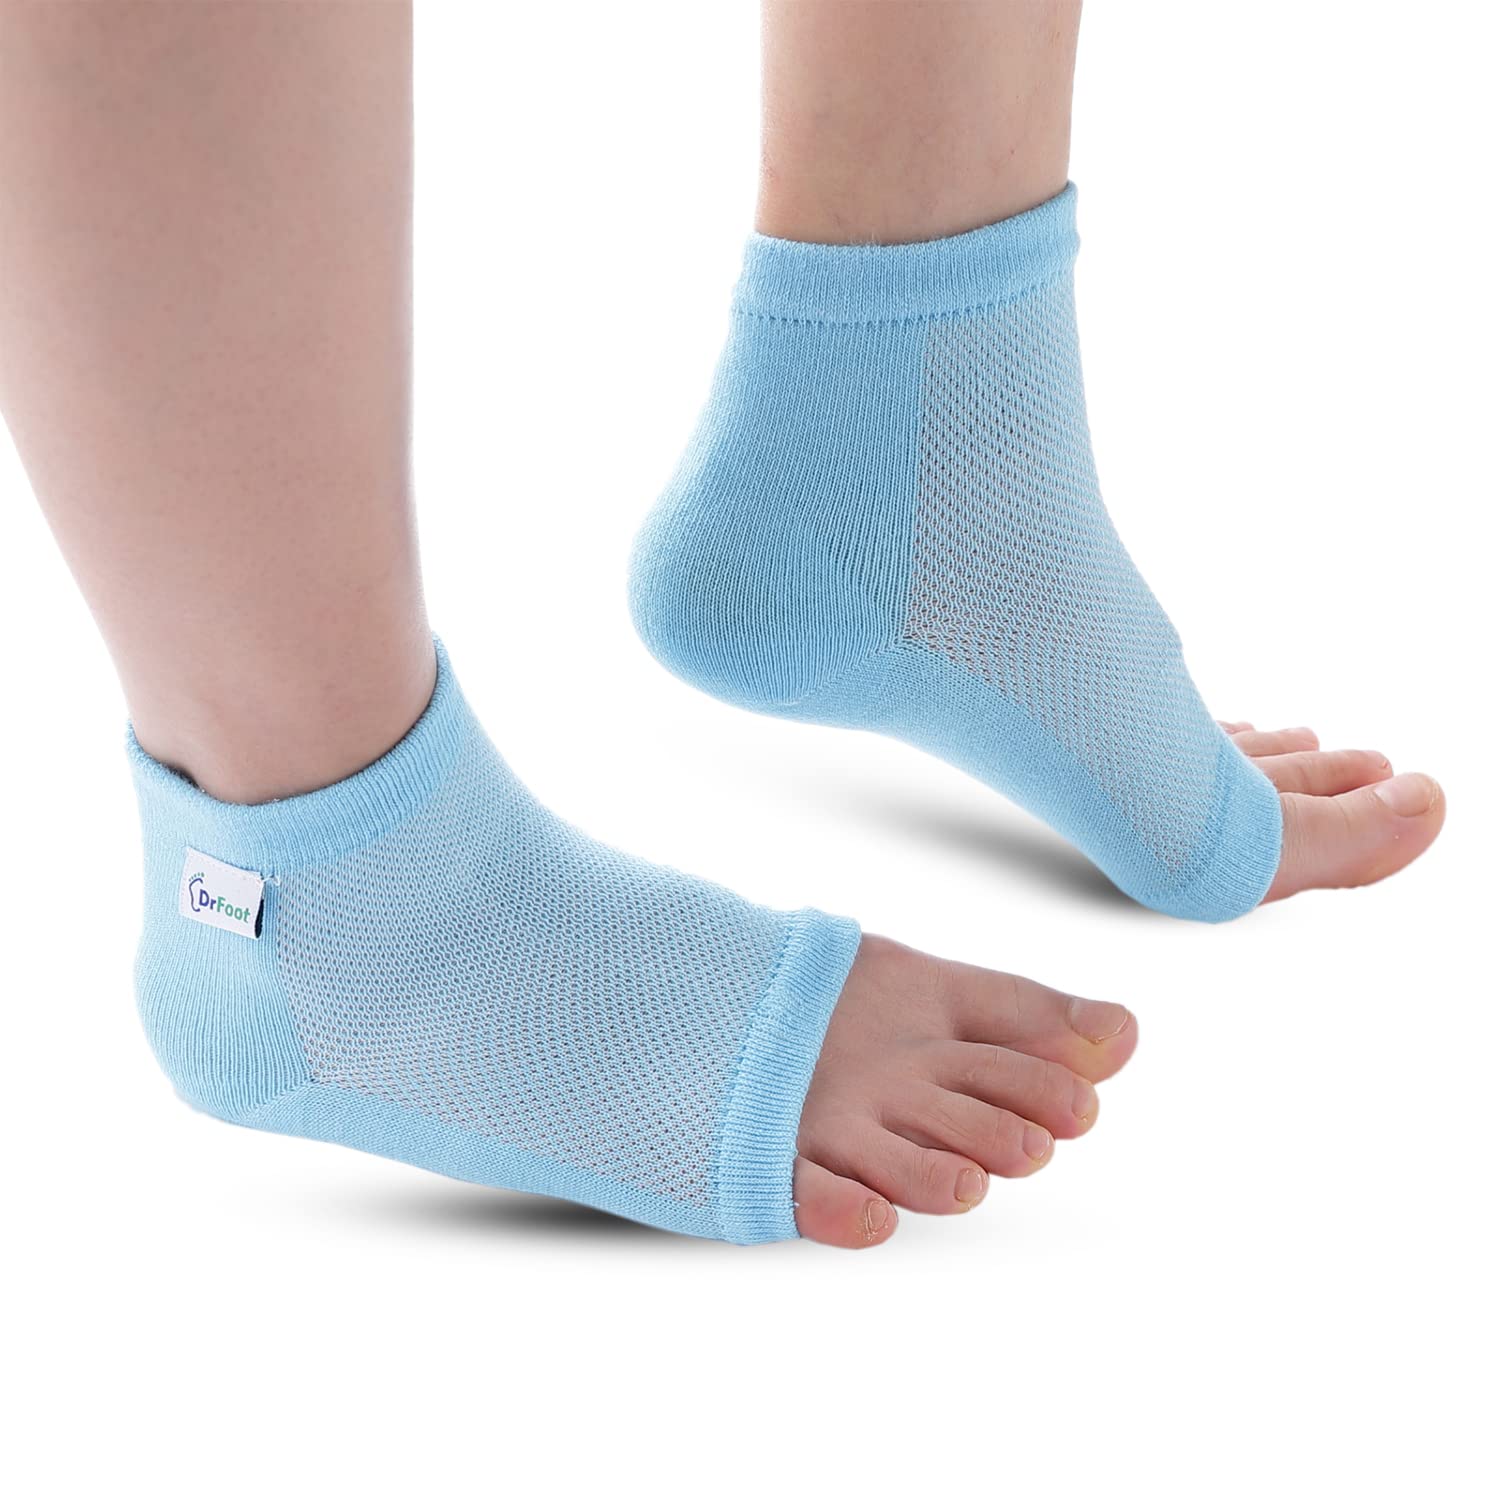 Dr Foot Silicone Gel Heel Socks | Silicone Gel Moisturizer Heel Sleeves To Smooth & Soften Rough Cracked Heels & Dry Feet Or Irritated Heels| For Men & Women | Free Size – 1 Pair (Pack of 3)